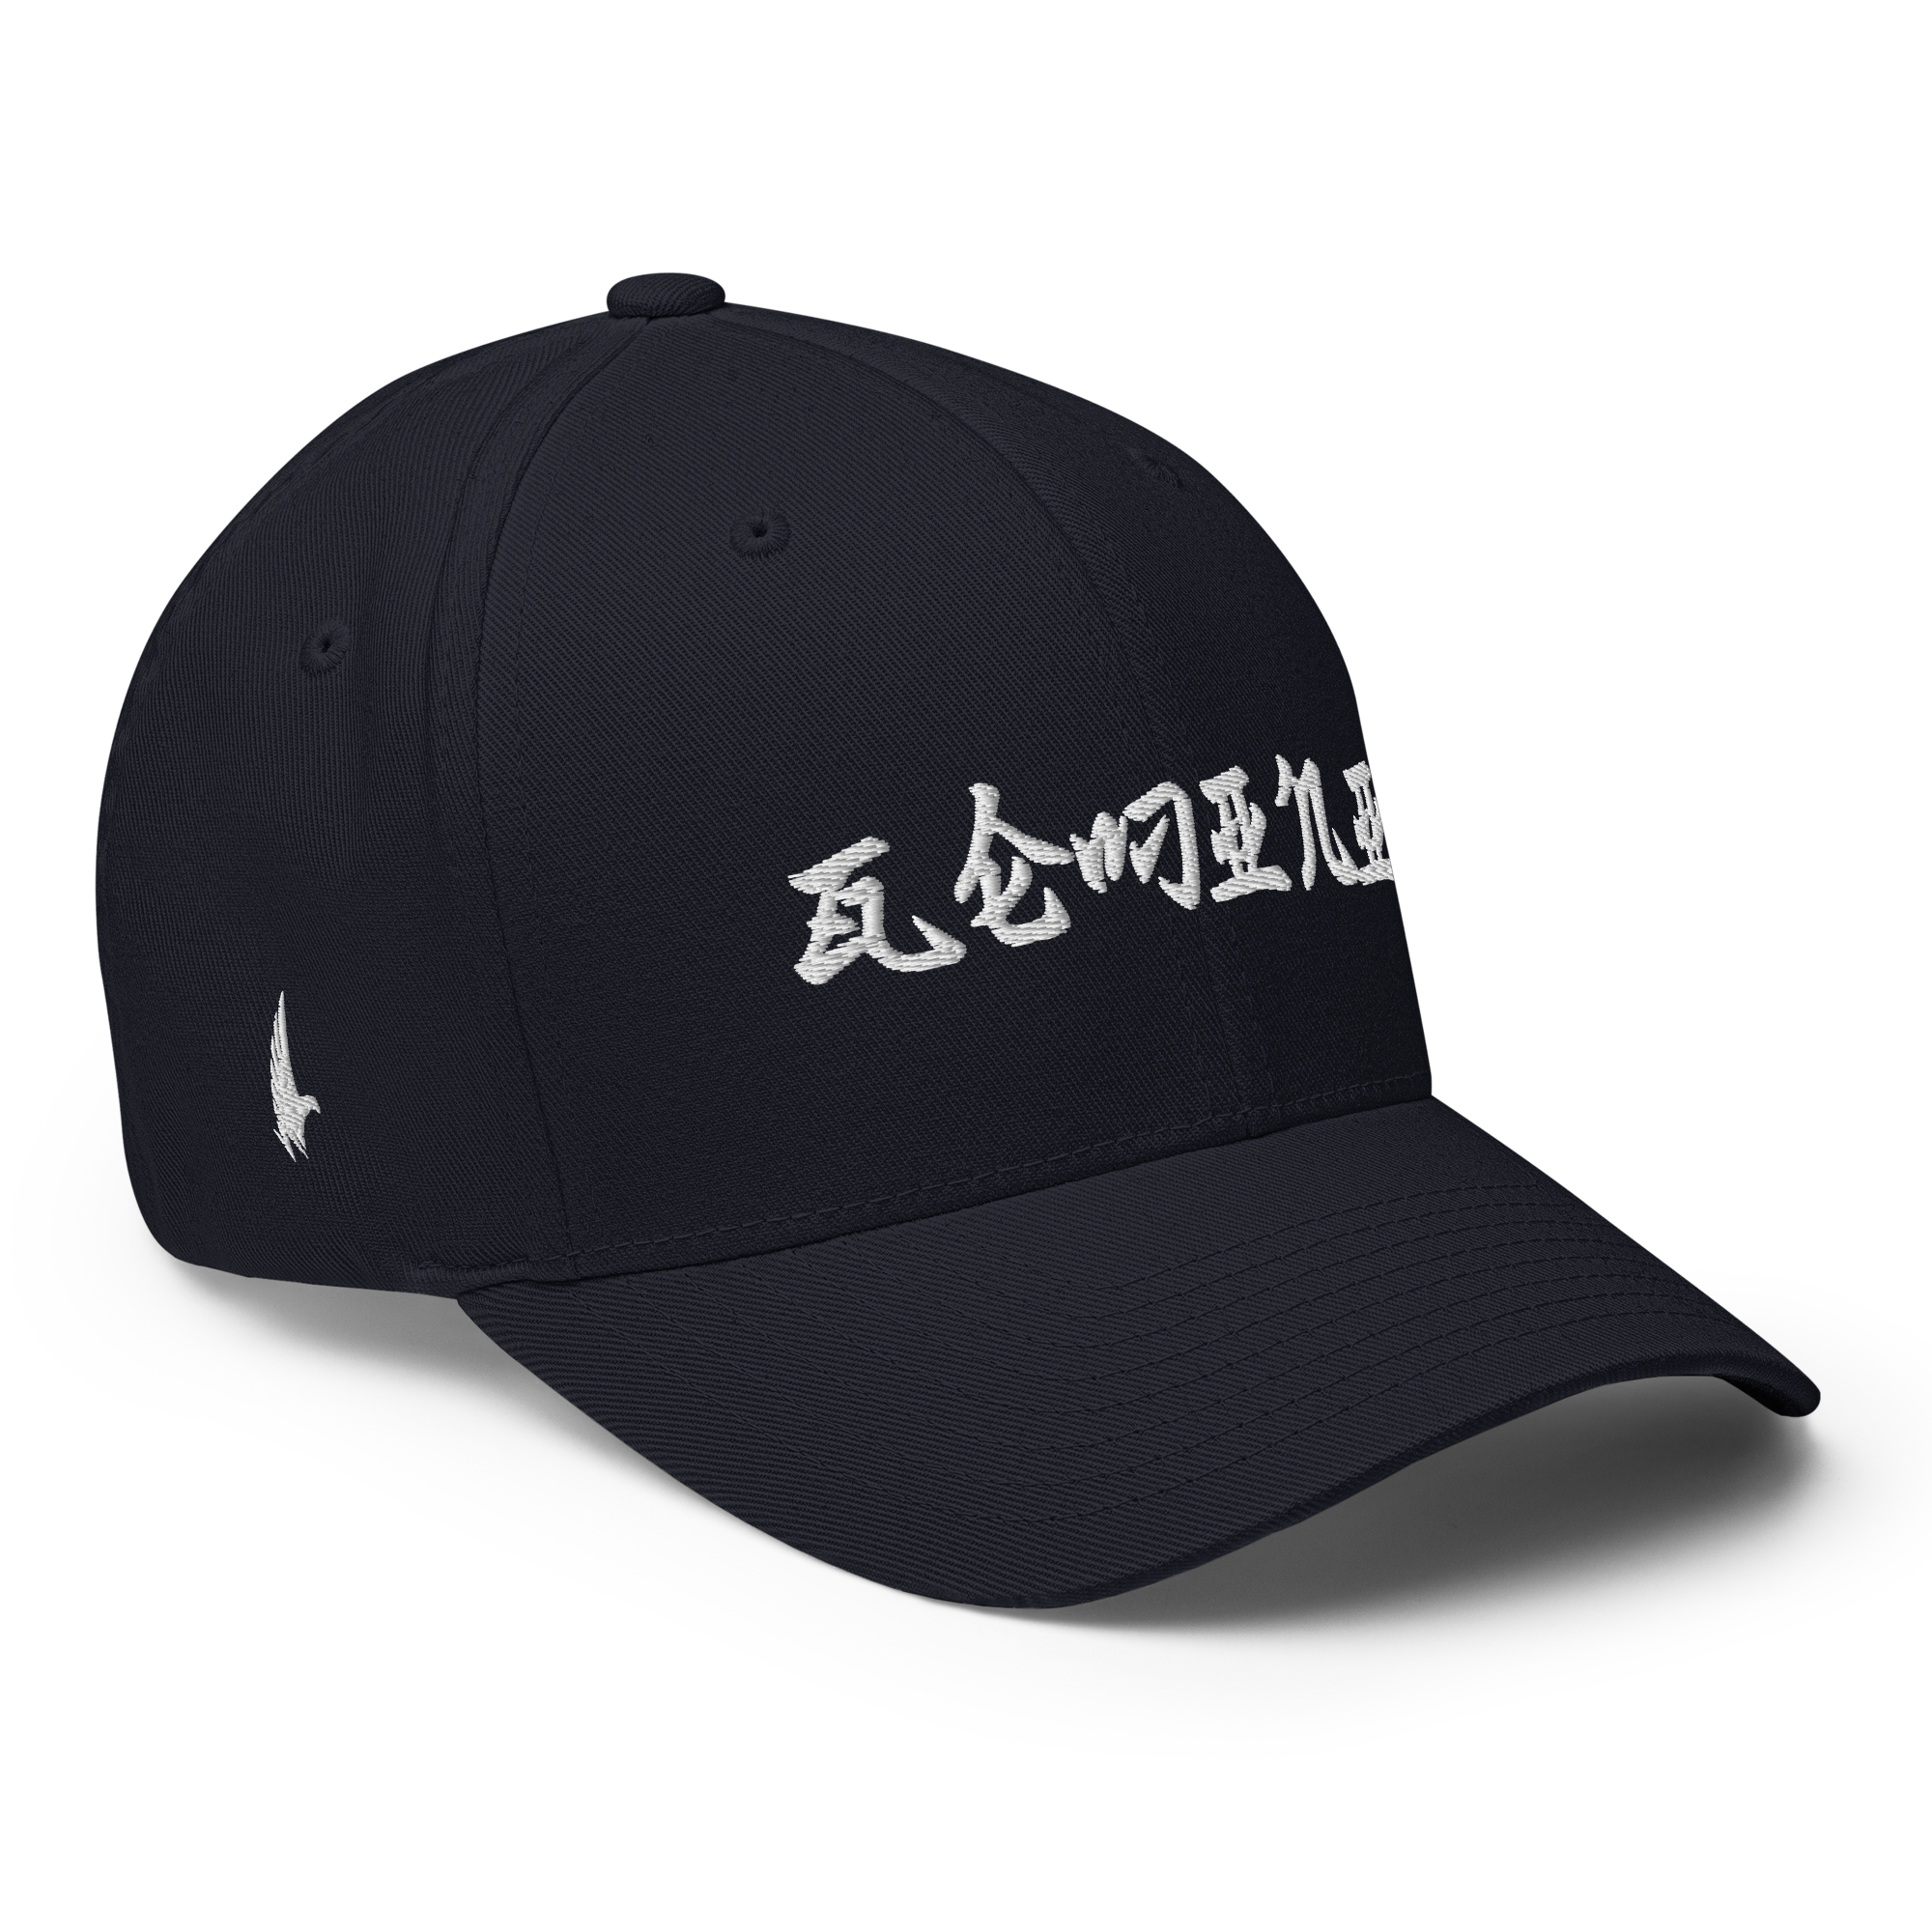 Gemini Rising Fitted Hat Navy - Loyalty Vibes